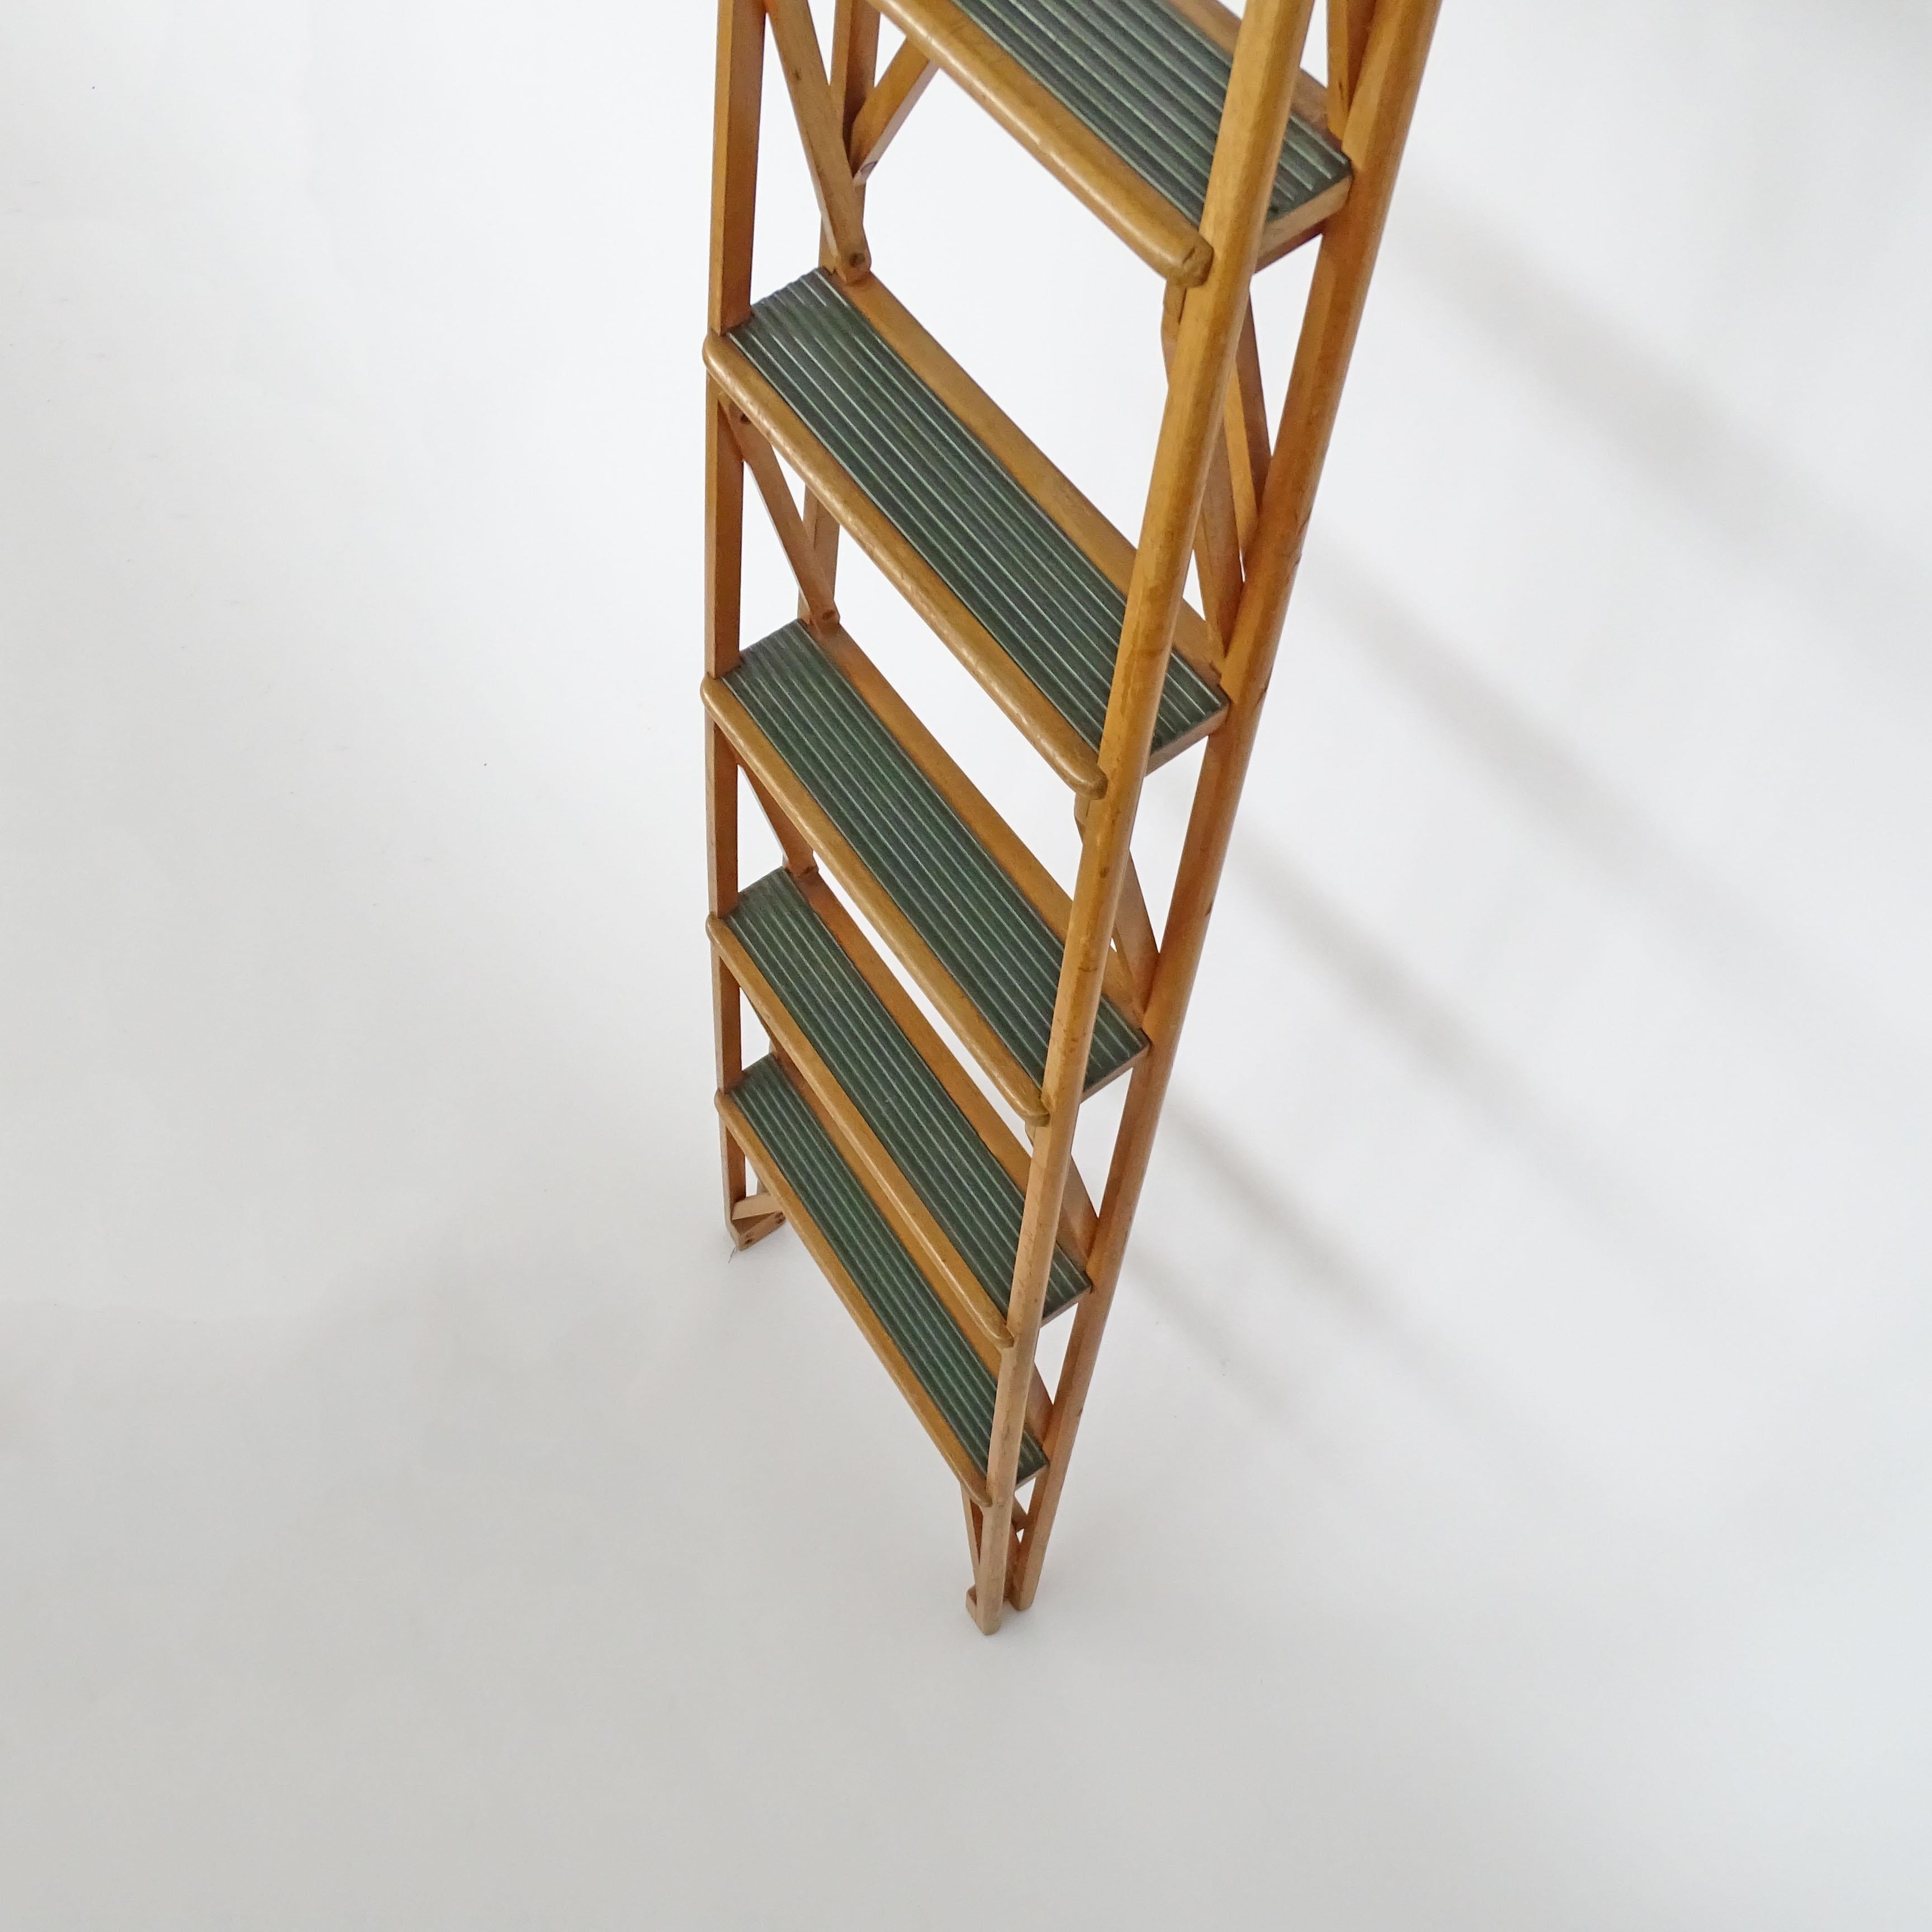 Italian Architectural Library Ladder Attributed to Franco Albini, 1950s 1